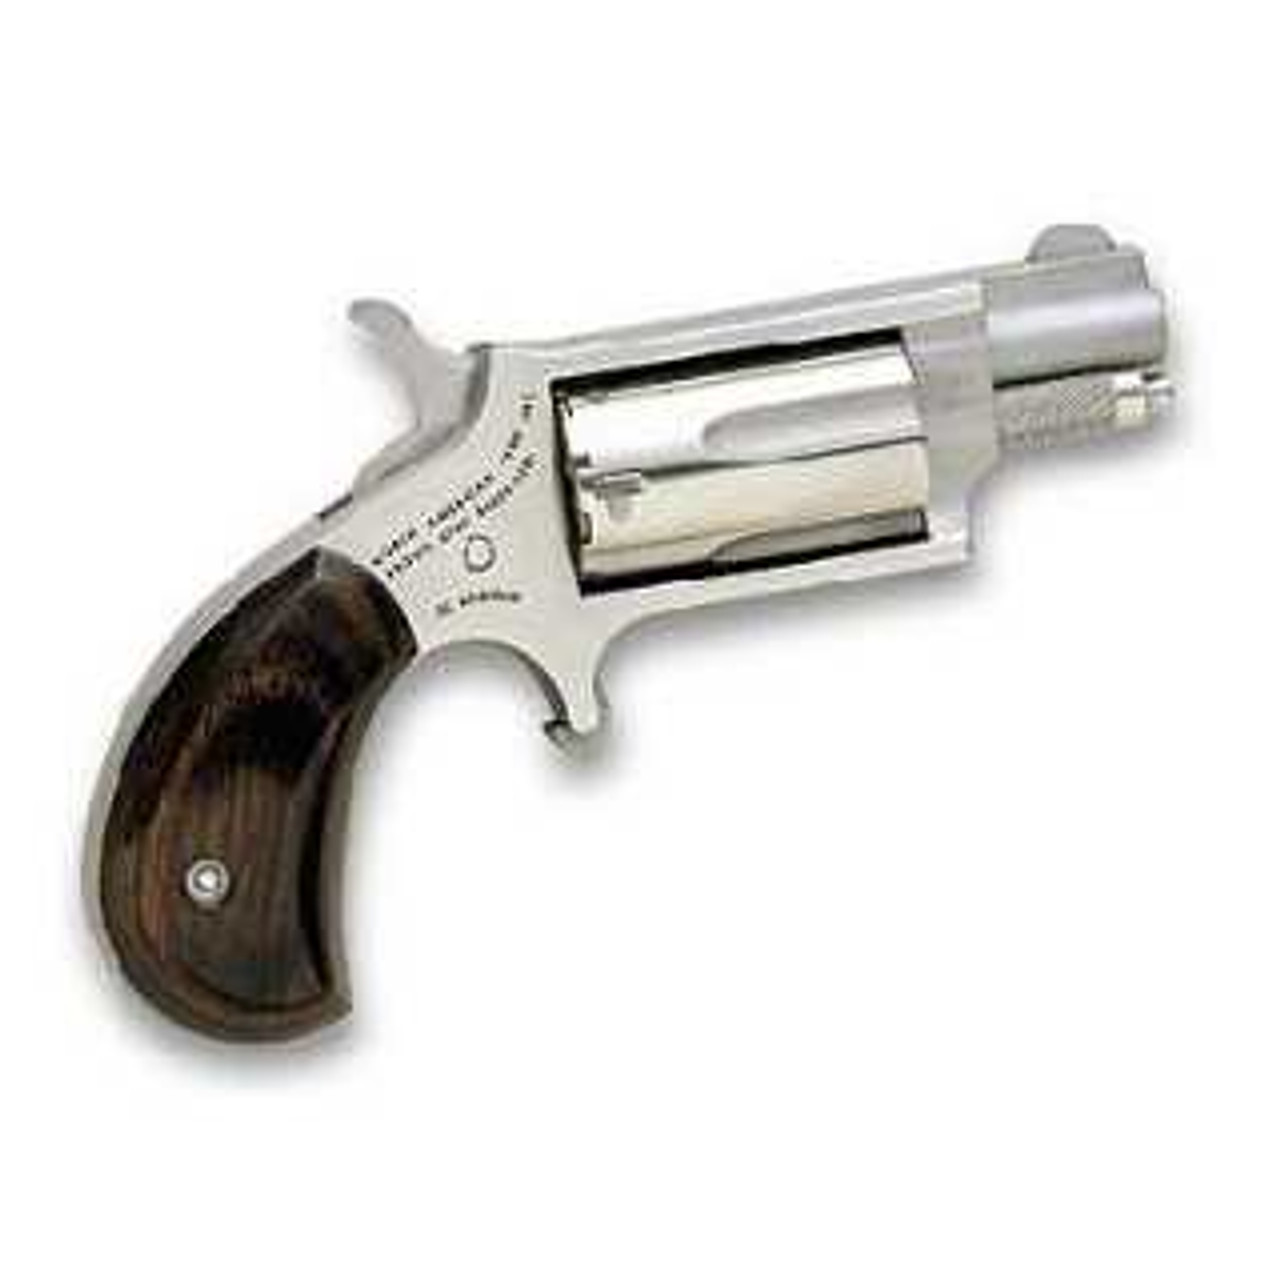 NAA MINI REVOLVER 22MAG 1 1/8 SS ROSEWOOD 5RD